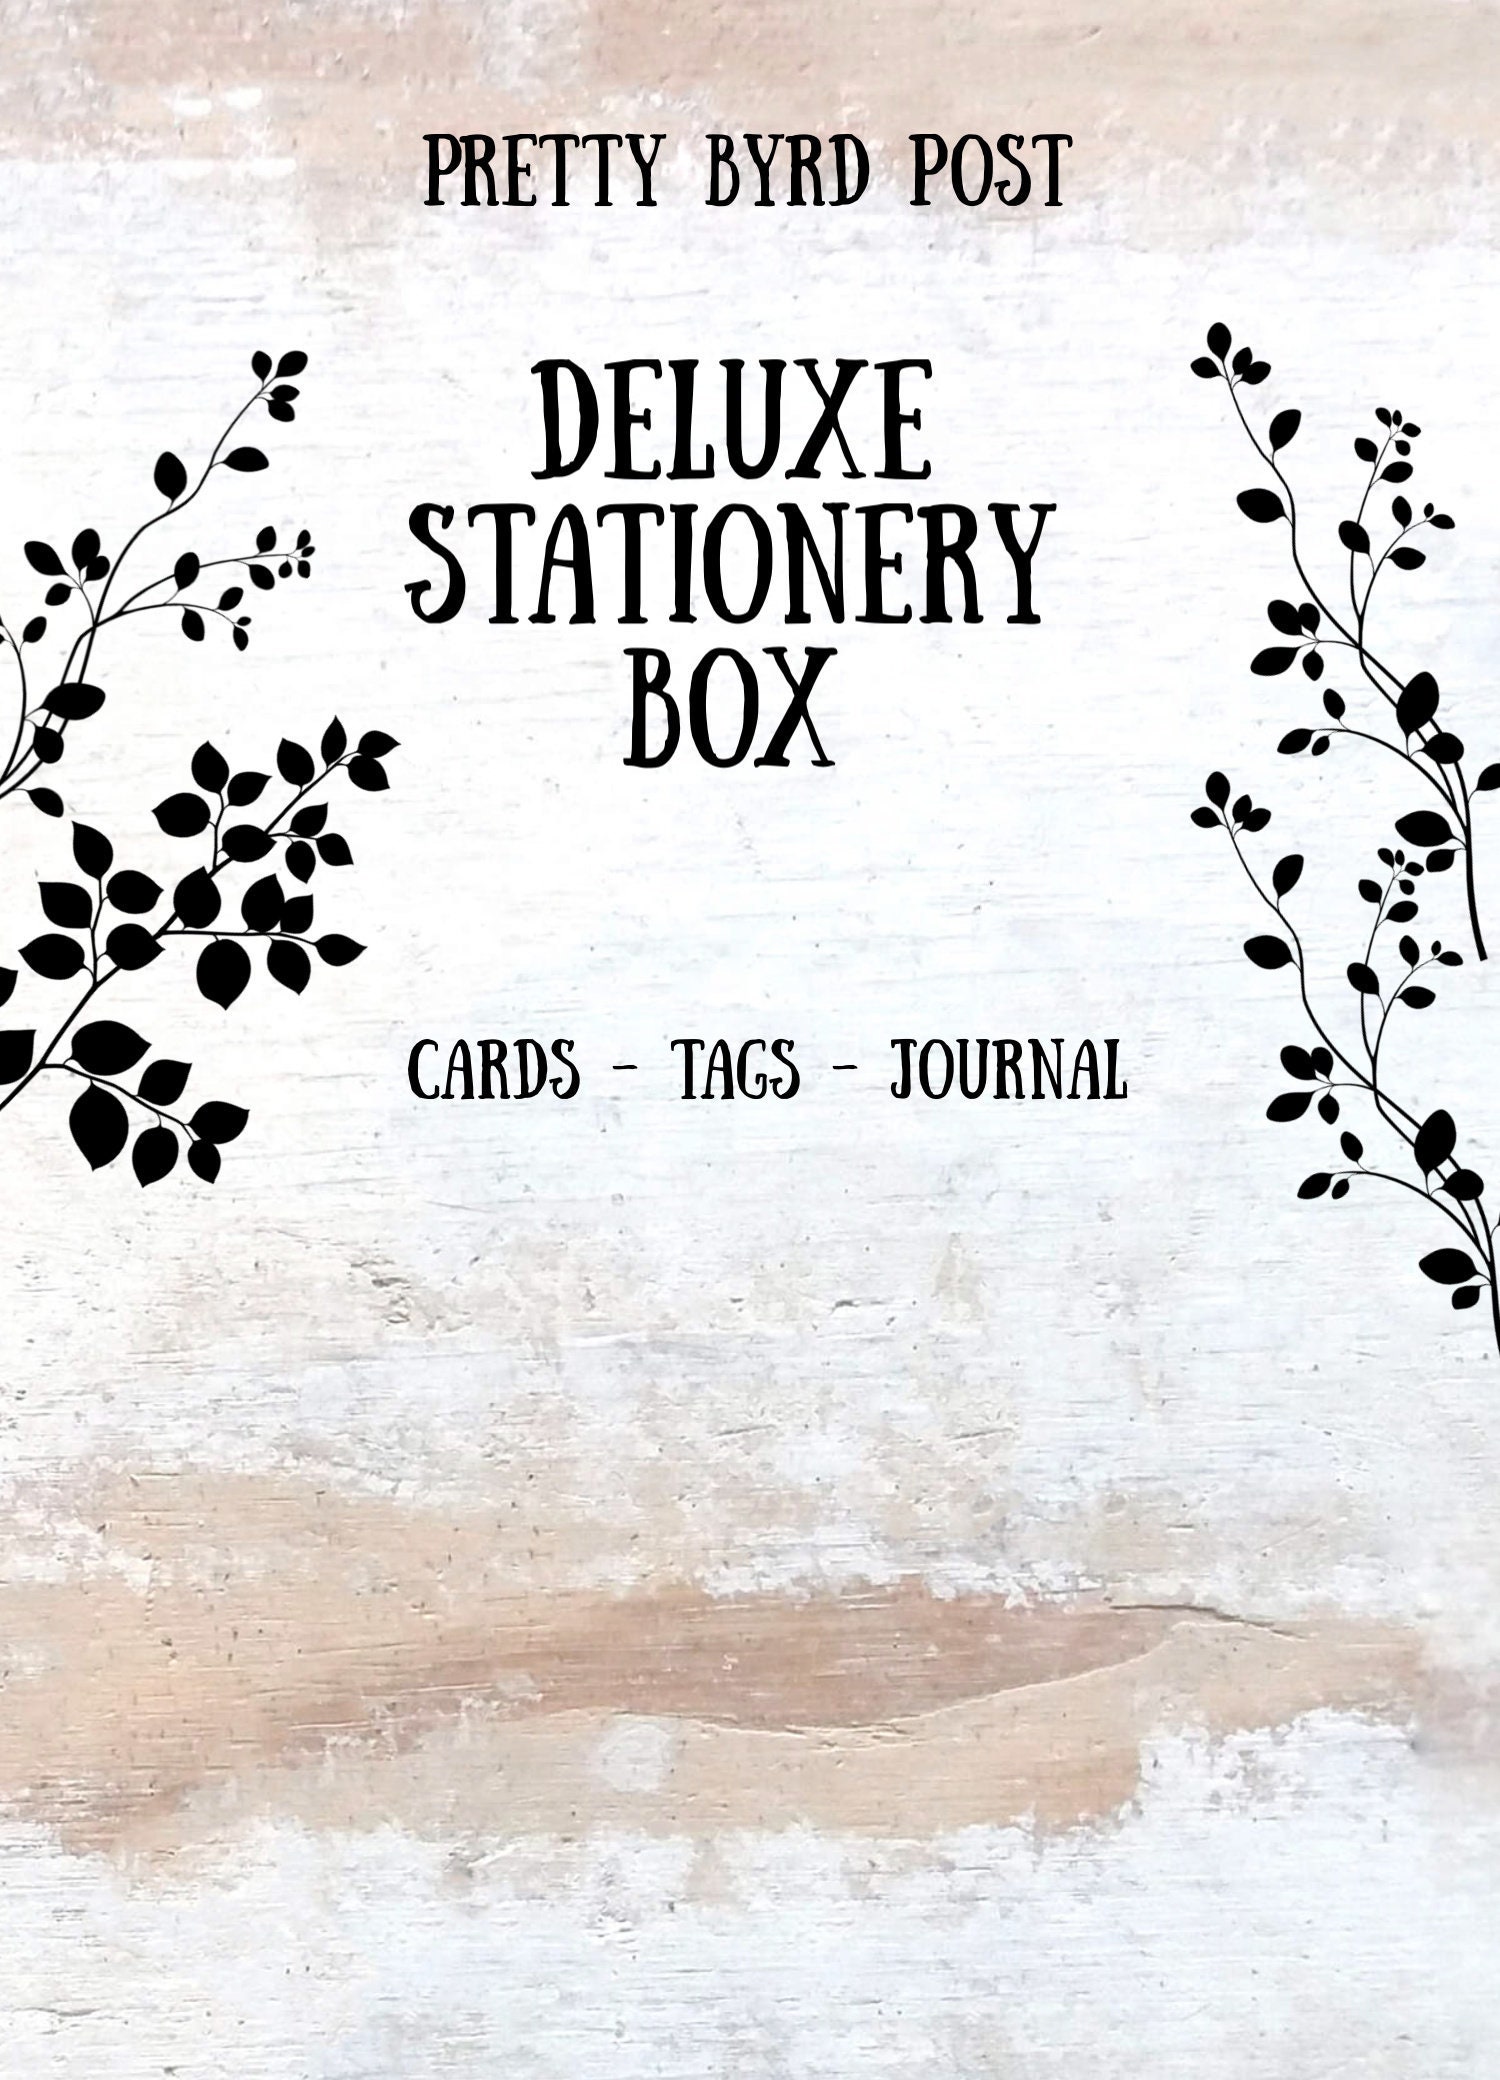 Deluxe Stationery Box